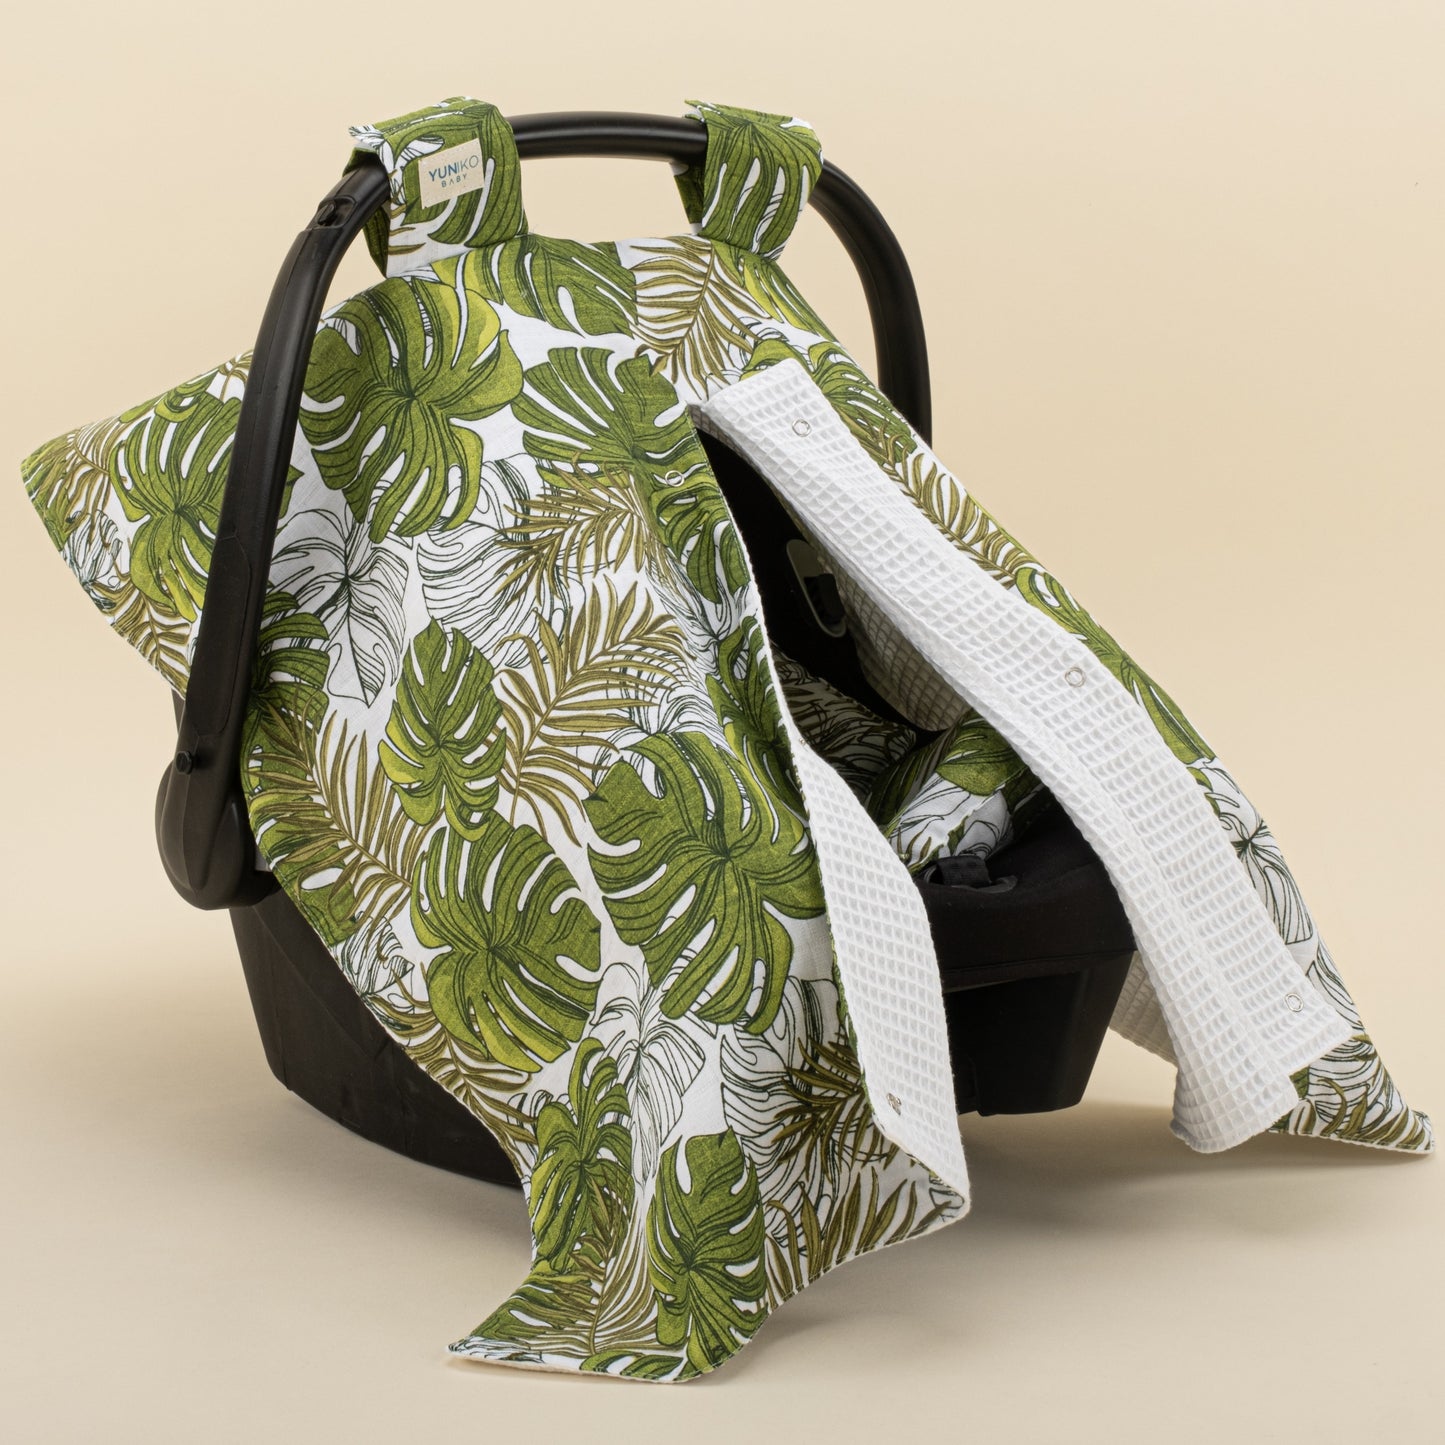 Stroller Cover Set - Double Side - White Honeycomb - Palm Leaves